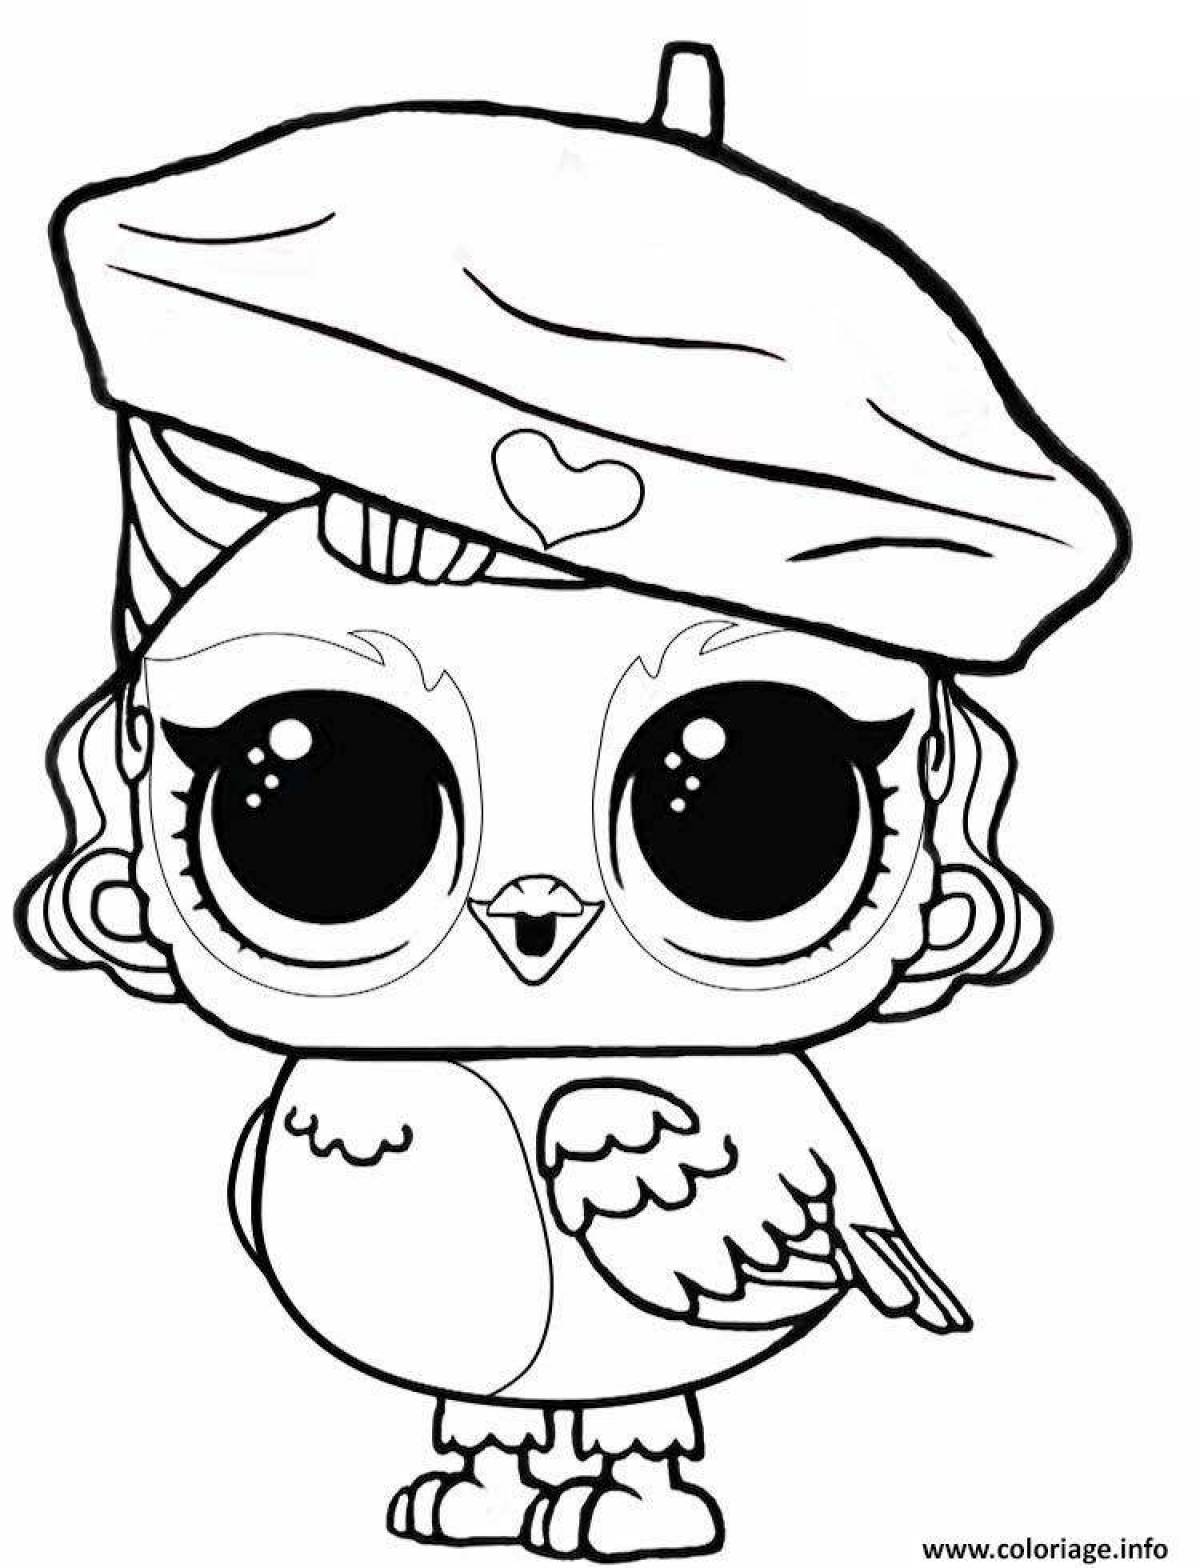 Animated lola coloring page